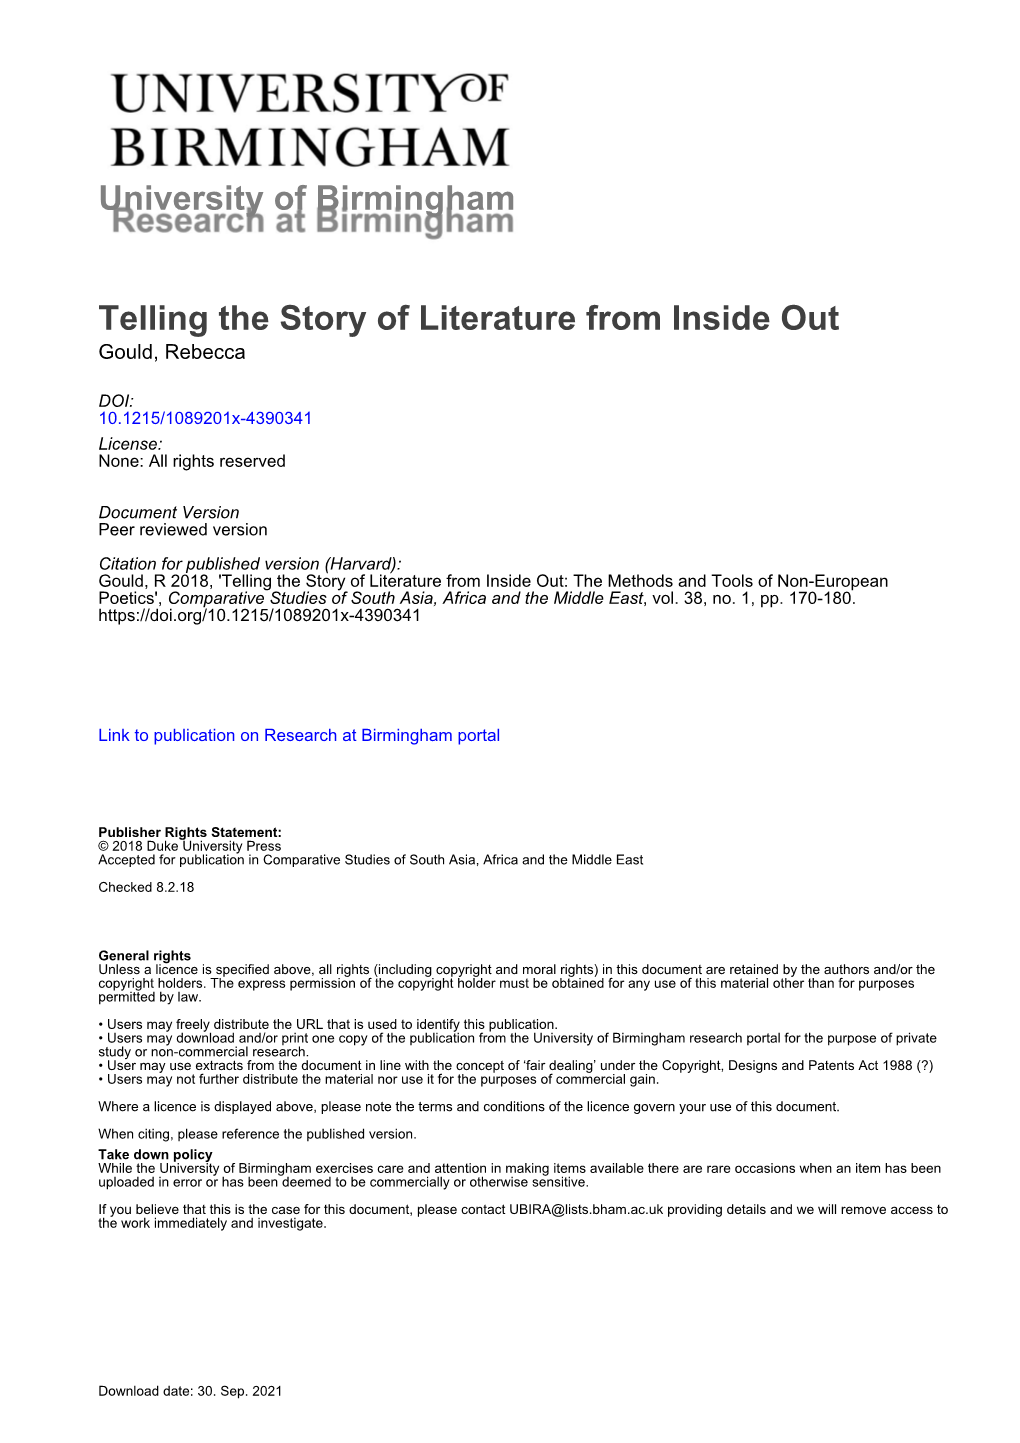 University of Birmingham Telling the Story of Literature from Inside